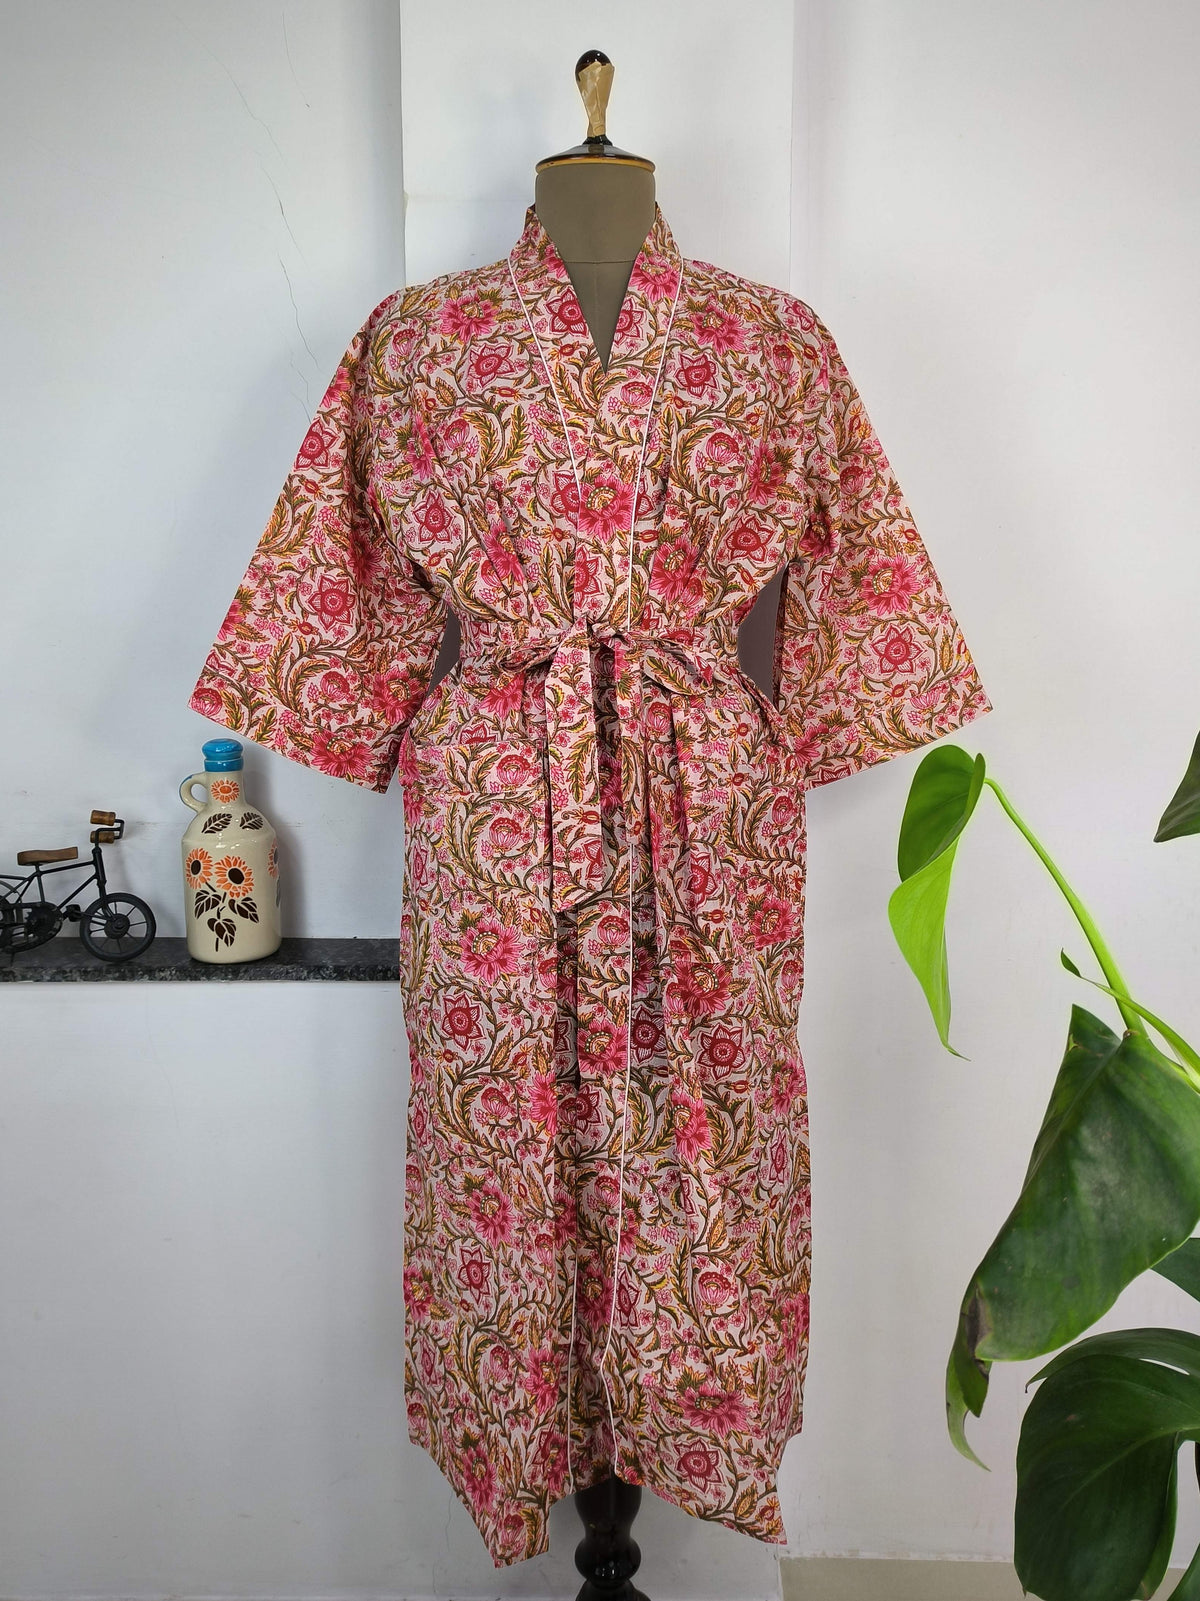 Pure Cotton Kimono Indian Handprinted Boho House Robe Summer Dress | Peach Red Floral Print | Beach Cover Up Wear | Christmas Present